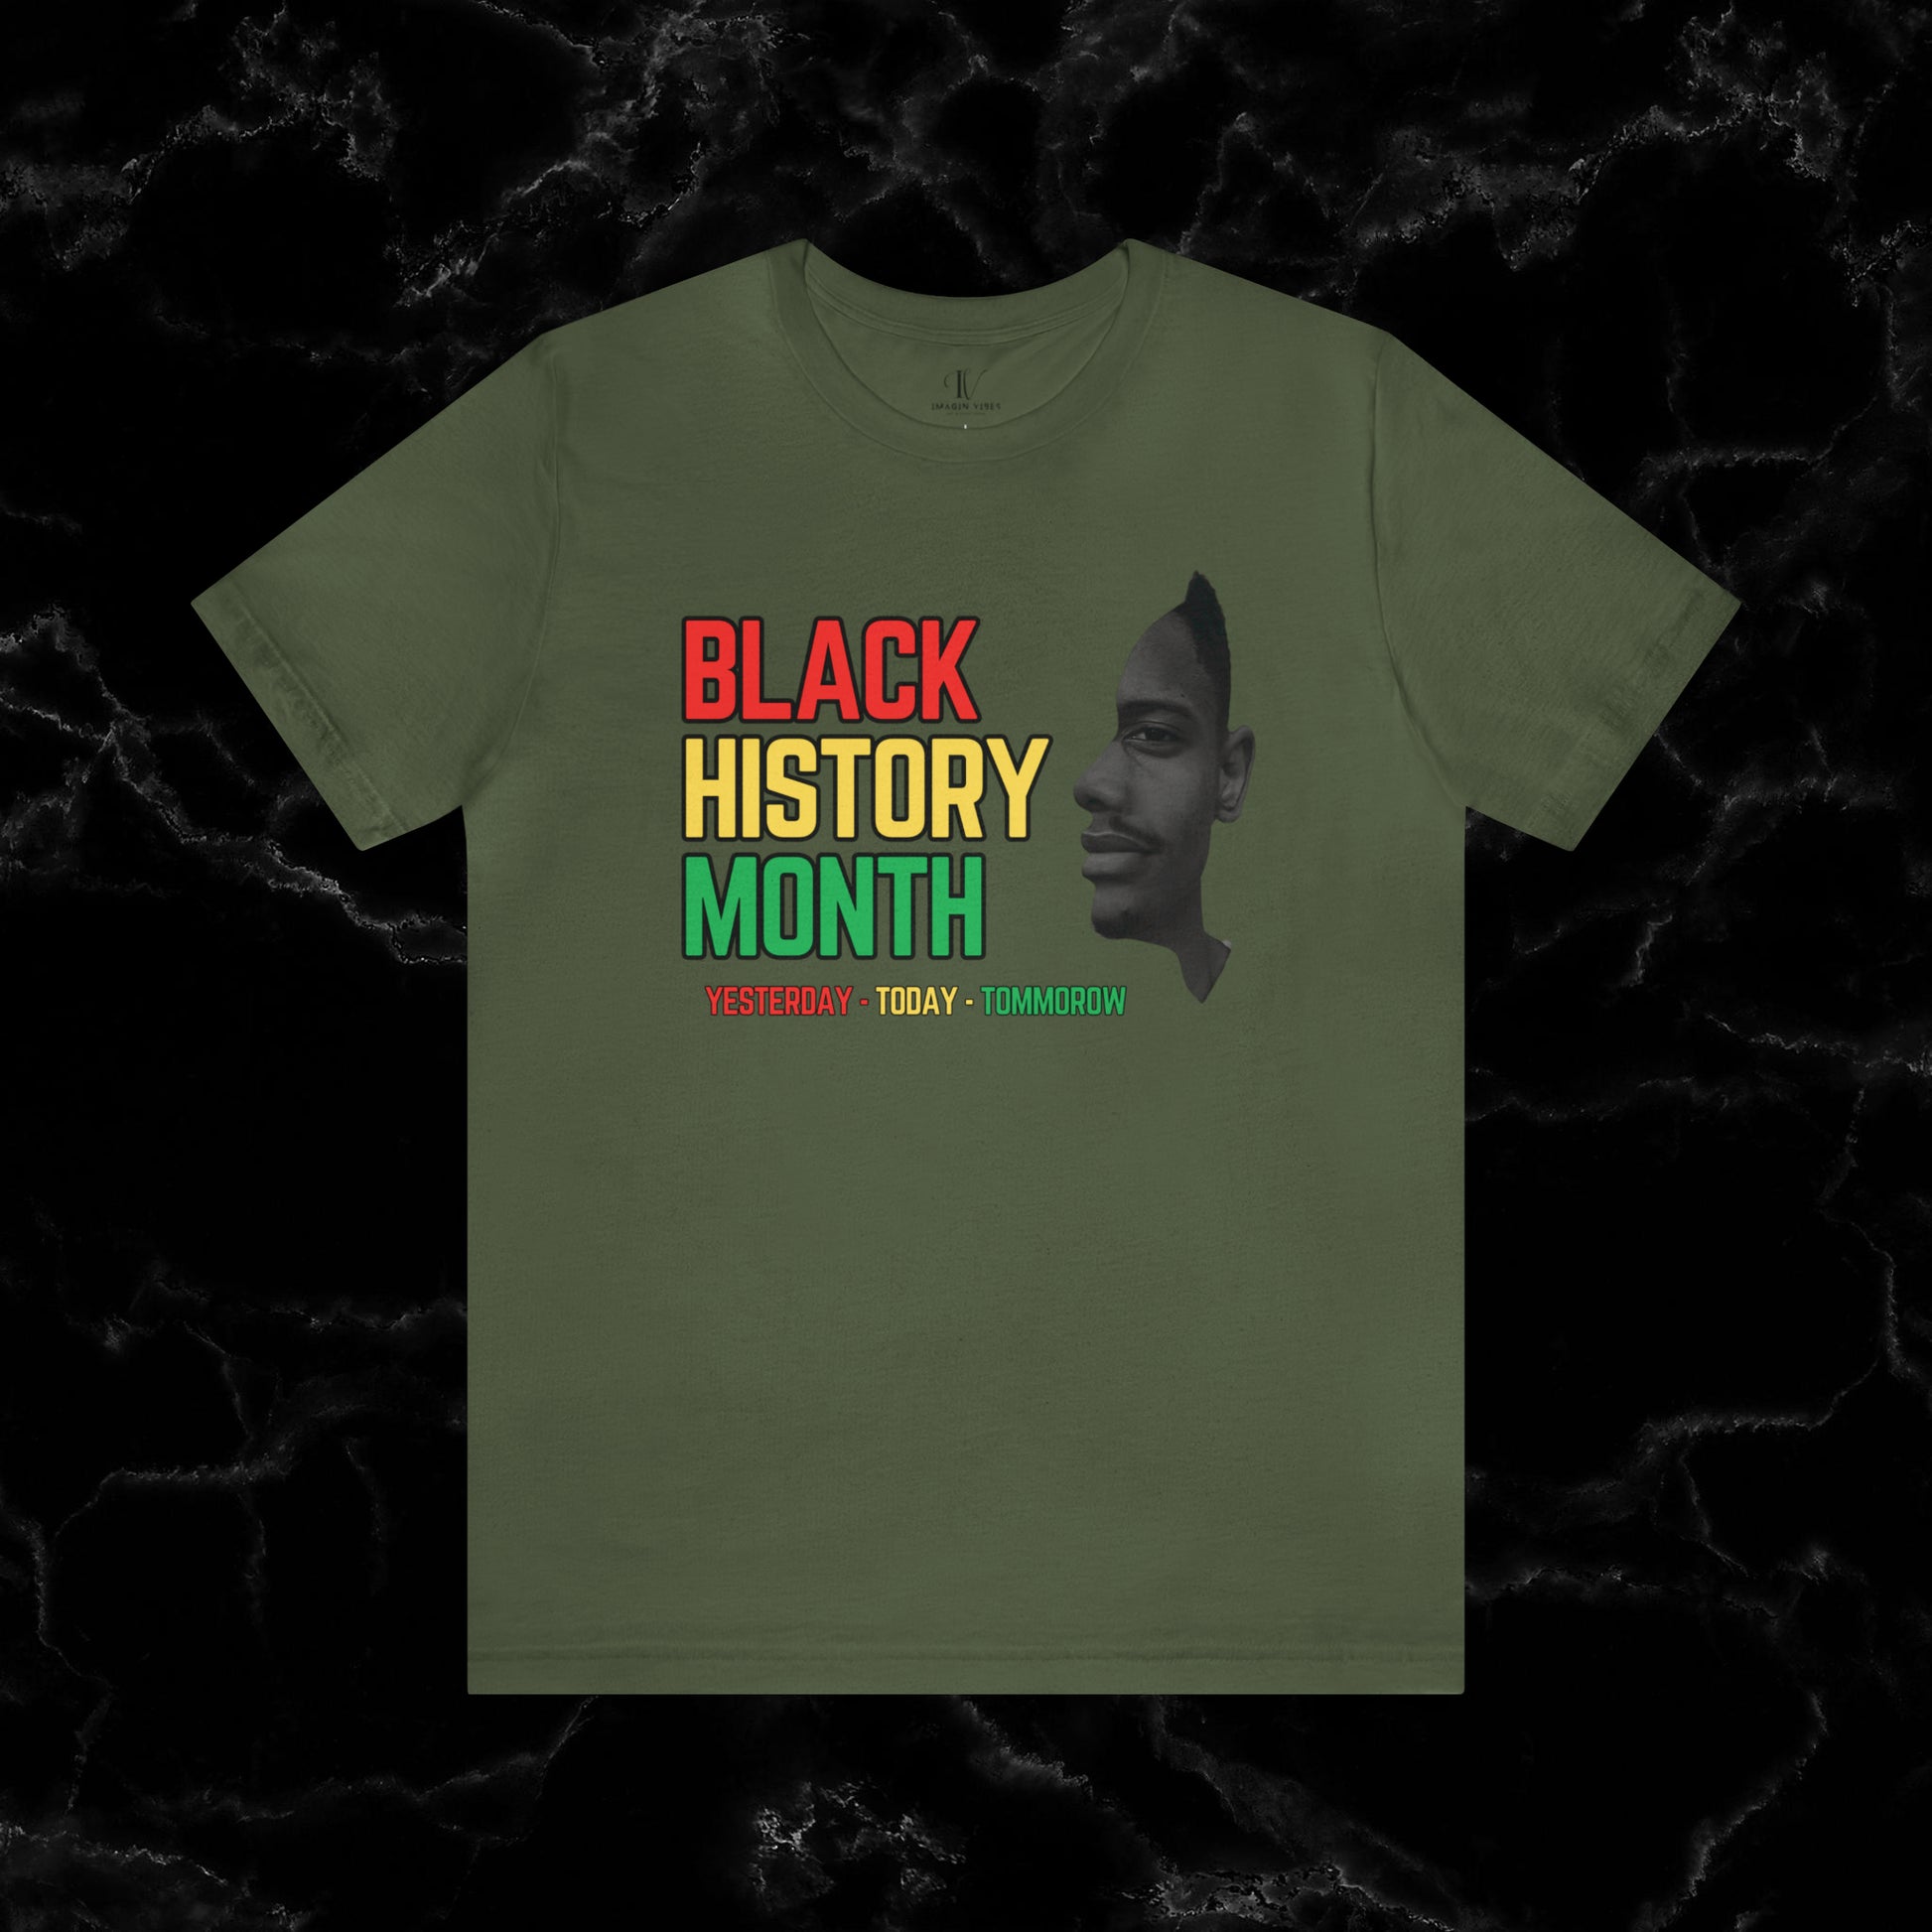 Empowering Black History Month Shirt - Yesterday, Today, Tomorrow - African American Pride T-Shirt Military Green XS 